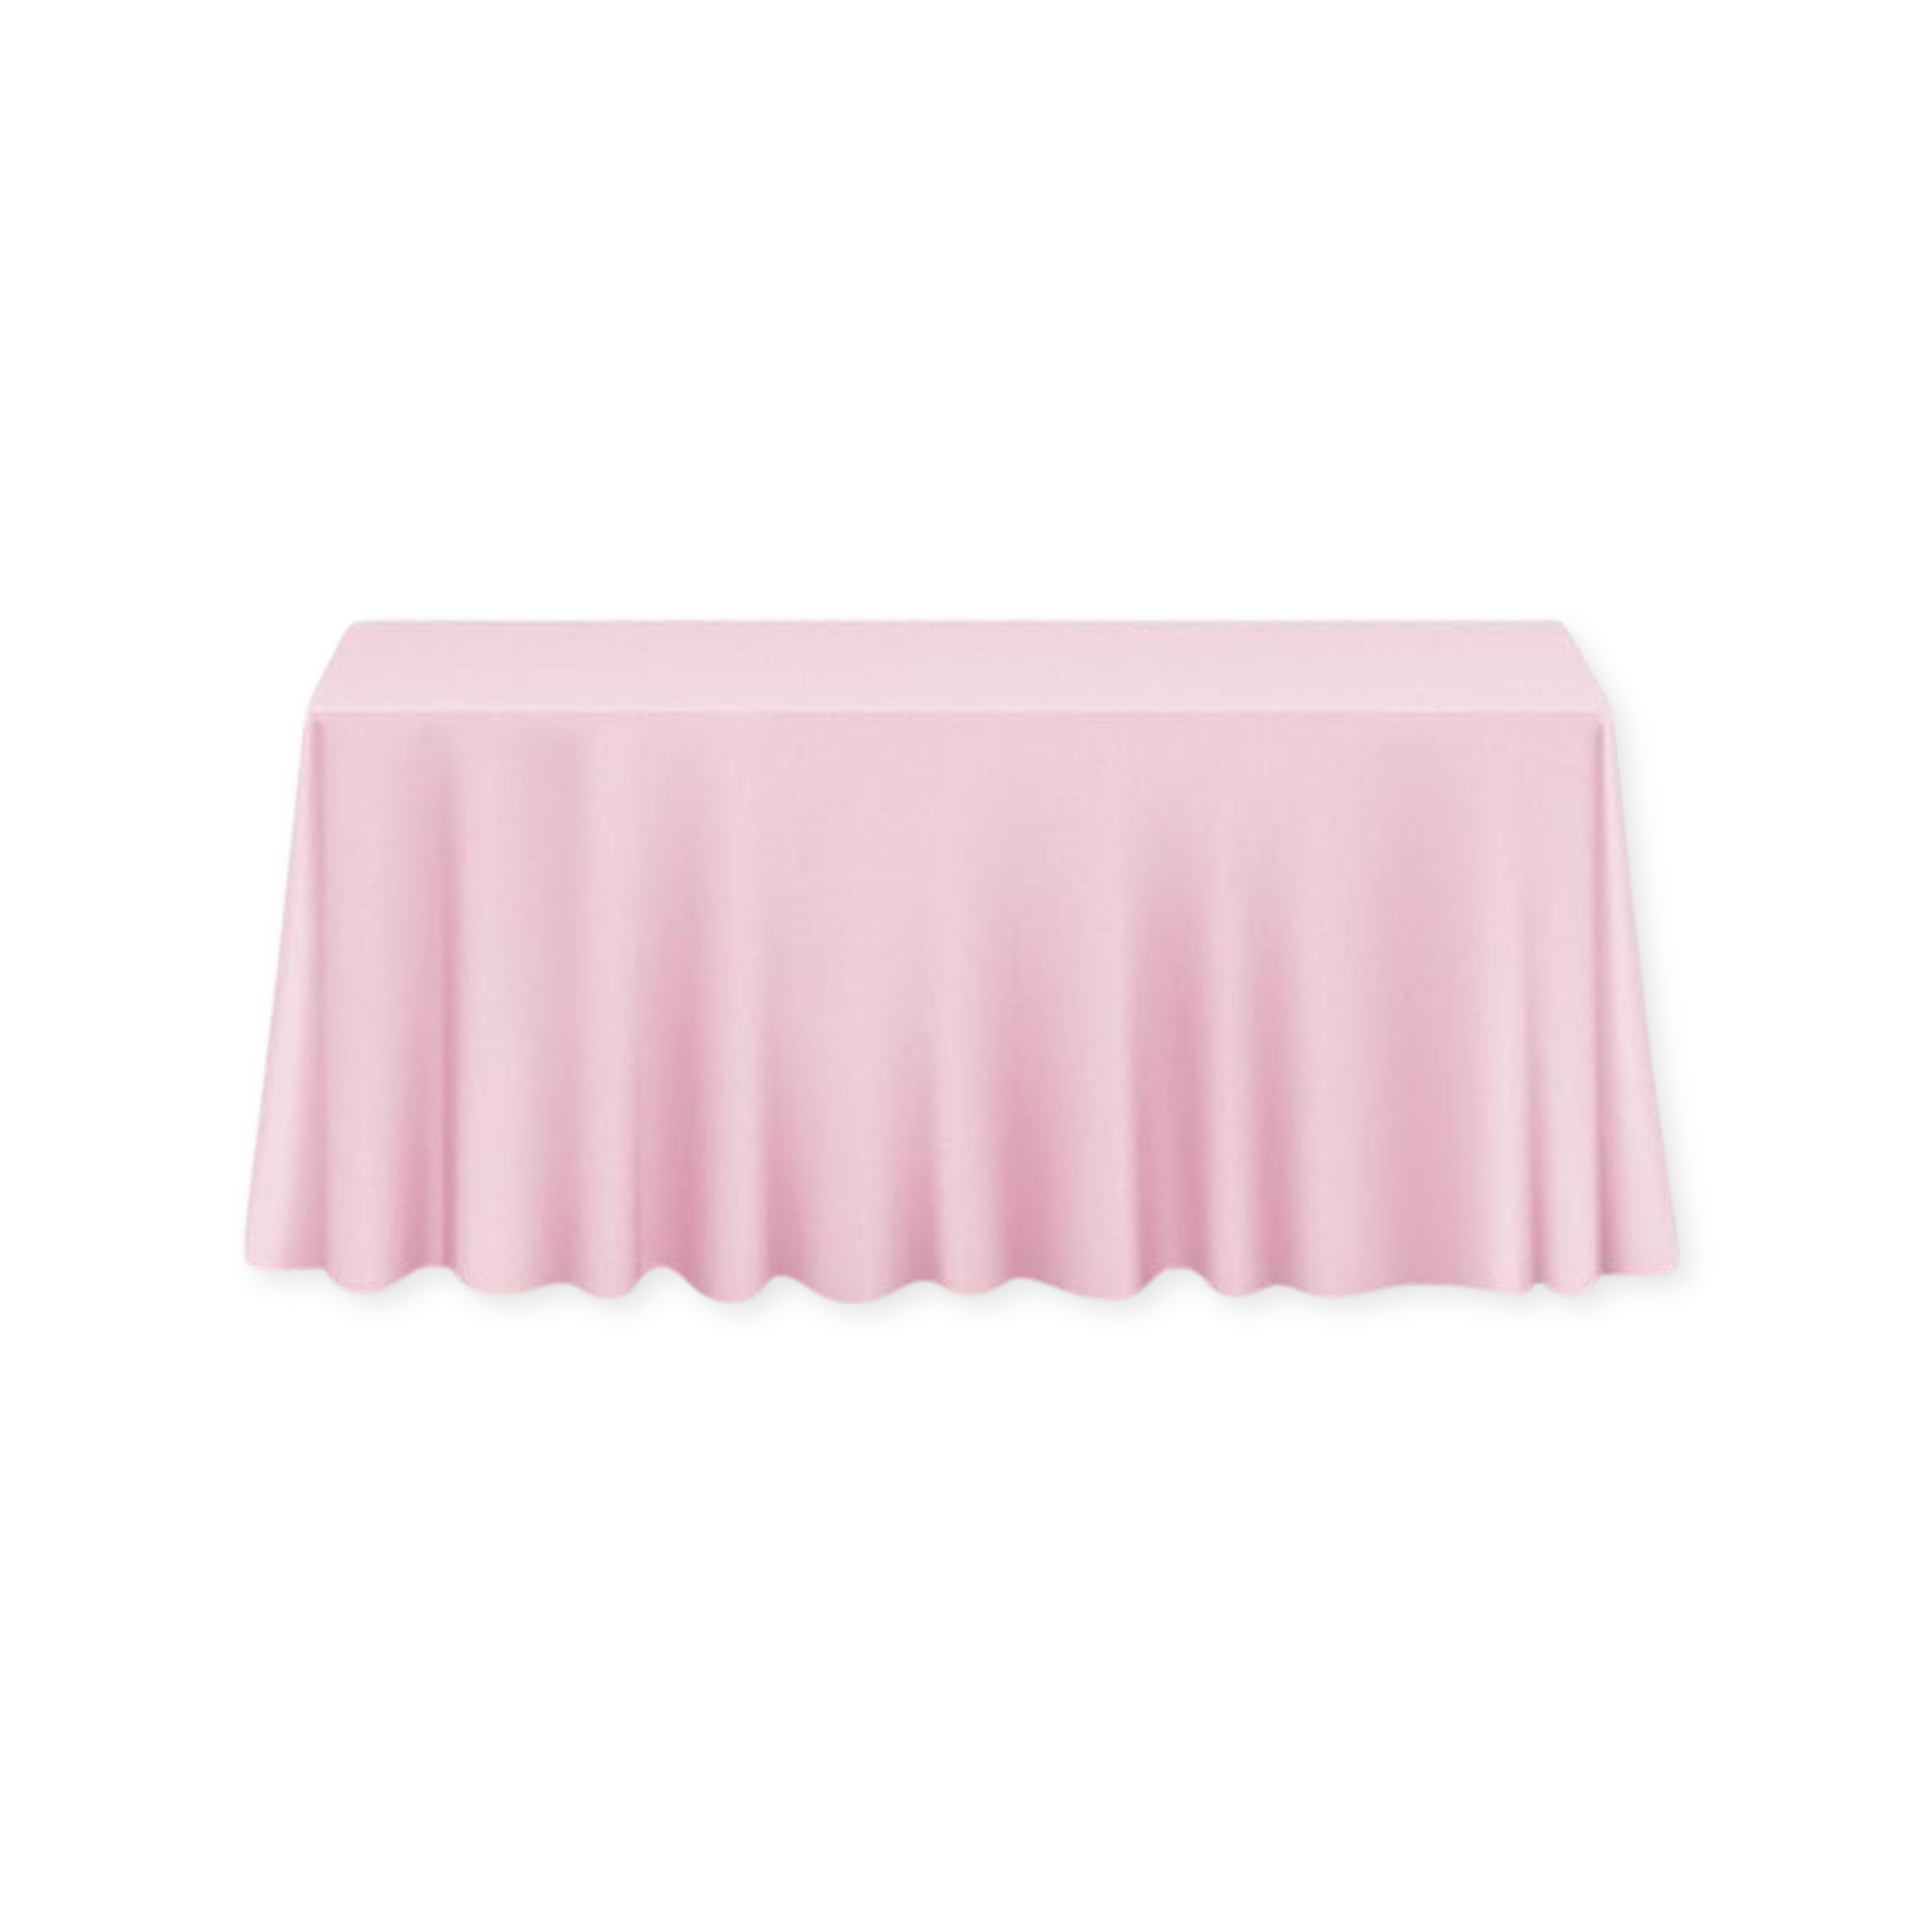 Tablecloth polyester rectangle pink commercial grade wedding party event rental panama city beach